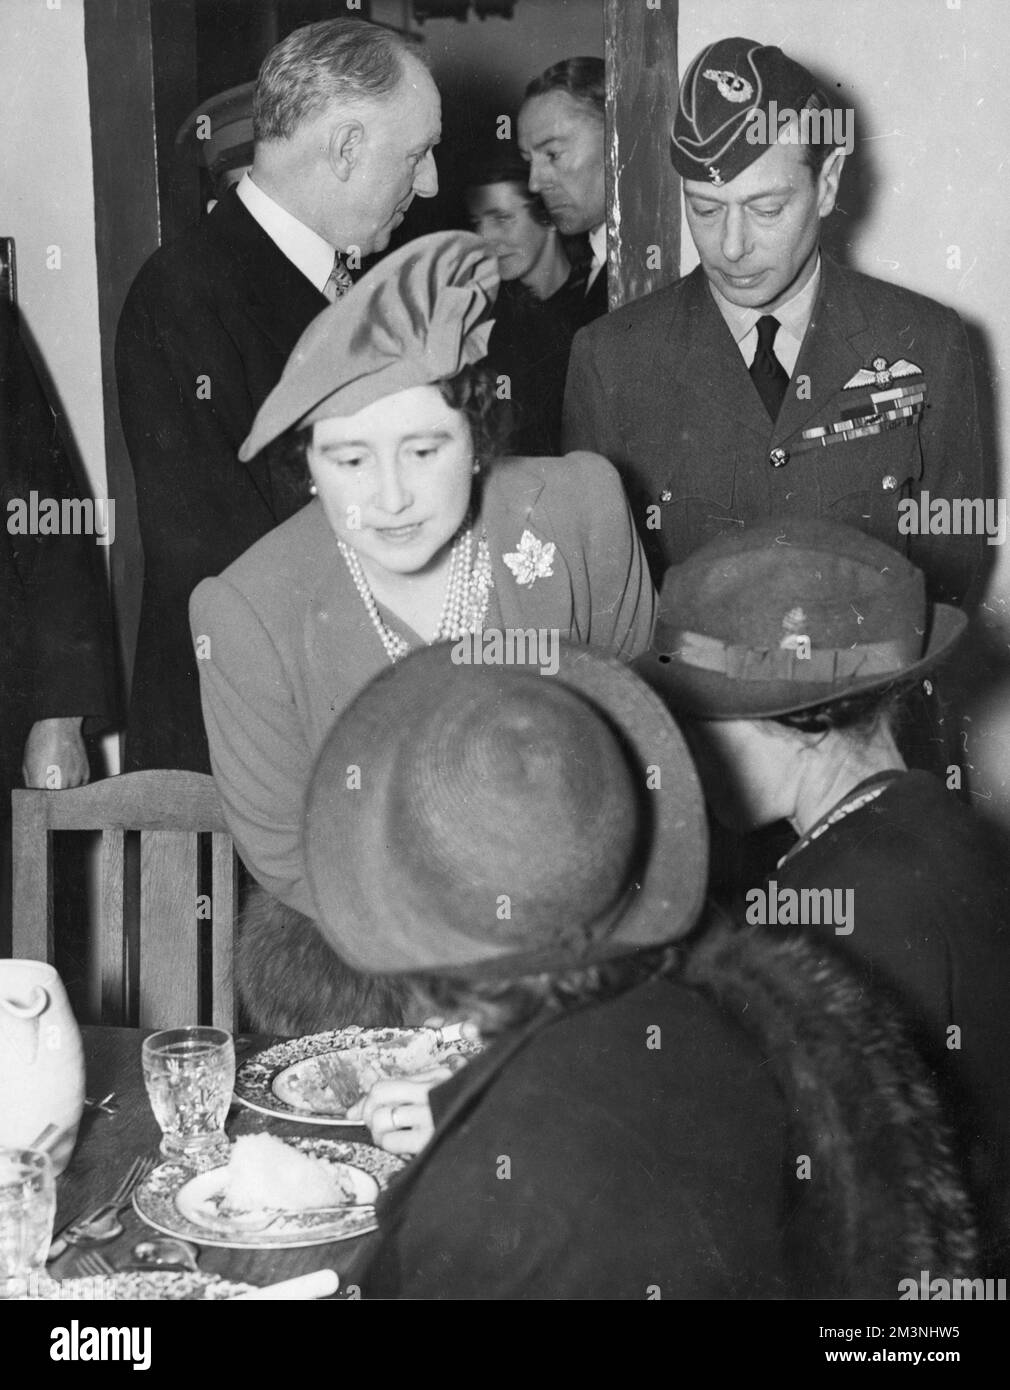 King George VI and Queen Elizabeth pictured visiting a communal centre established in South London during the Blitz to provide meals for people who had been bombed out of their homes by German air raids.  The King is in  RAF uniform.     Date: 1940 Stock Photo